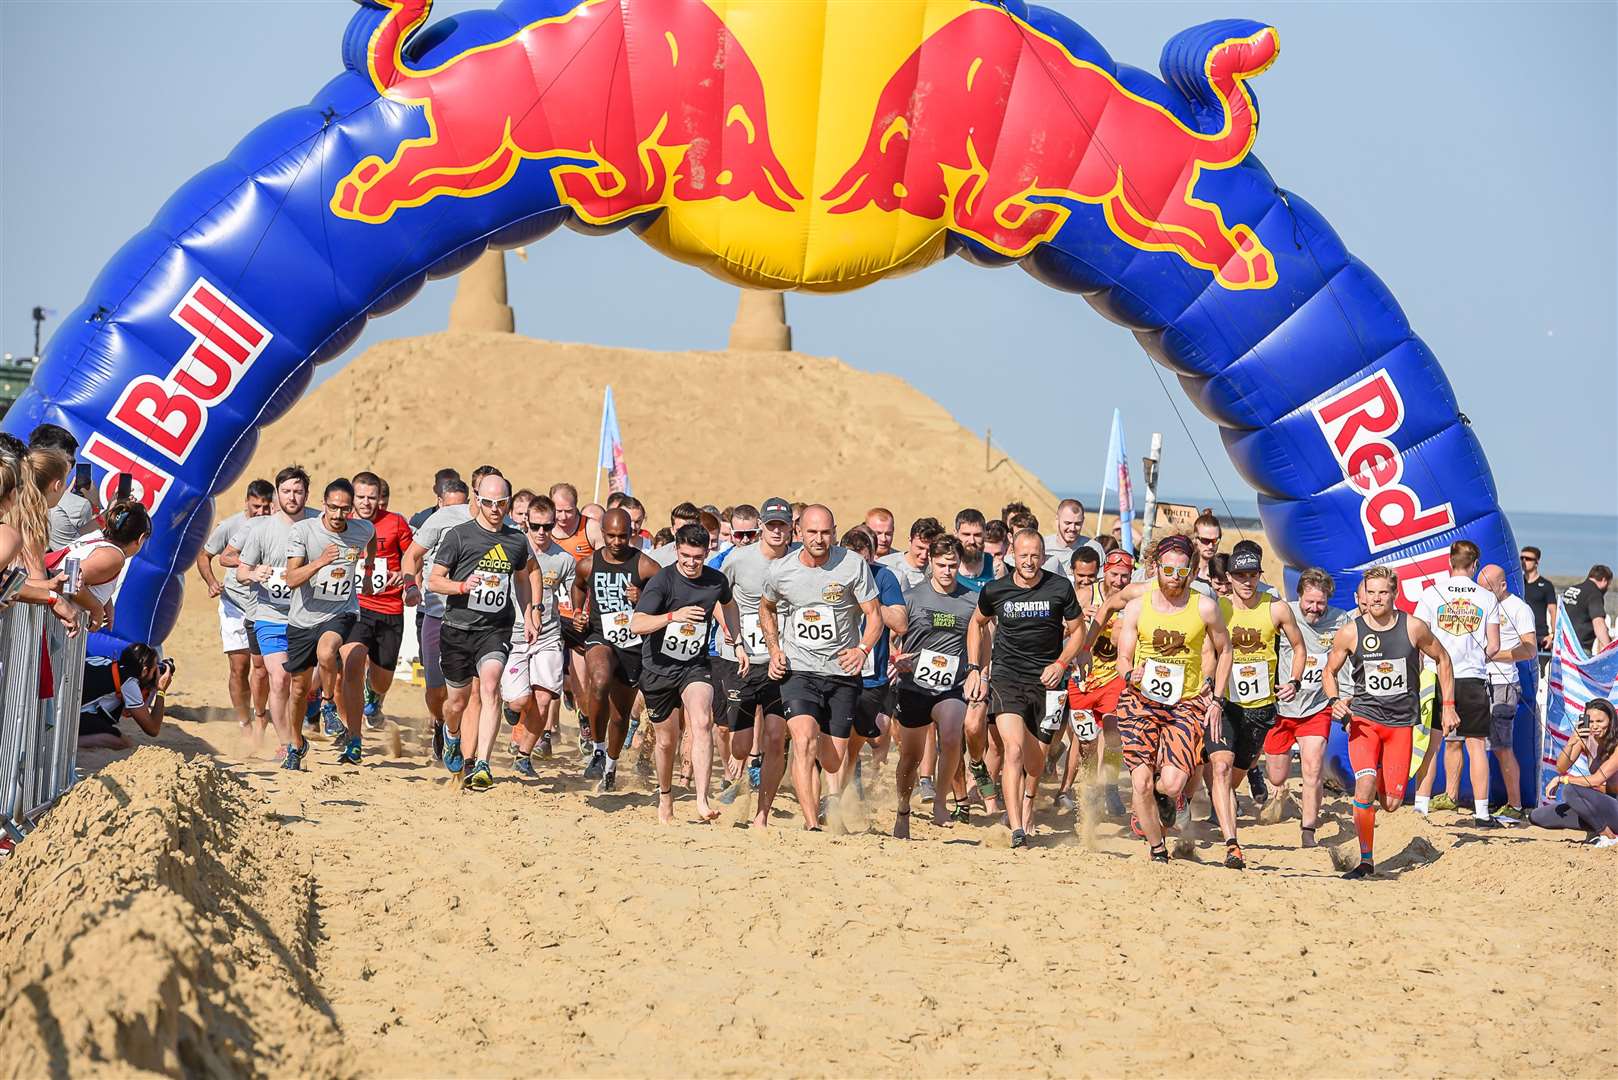 More than 600 competitors will take on the Red Bull Quicksand course in Margate